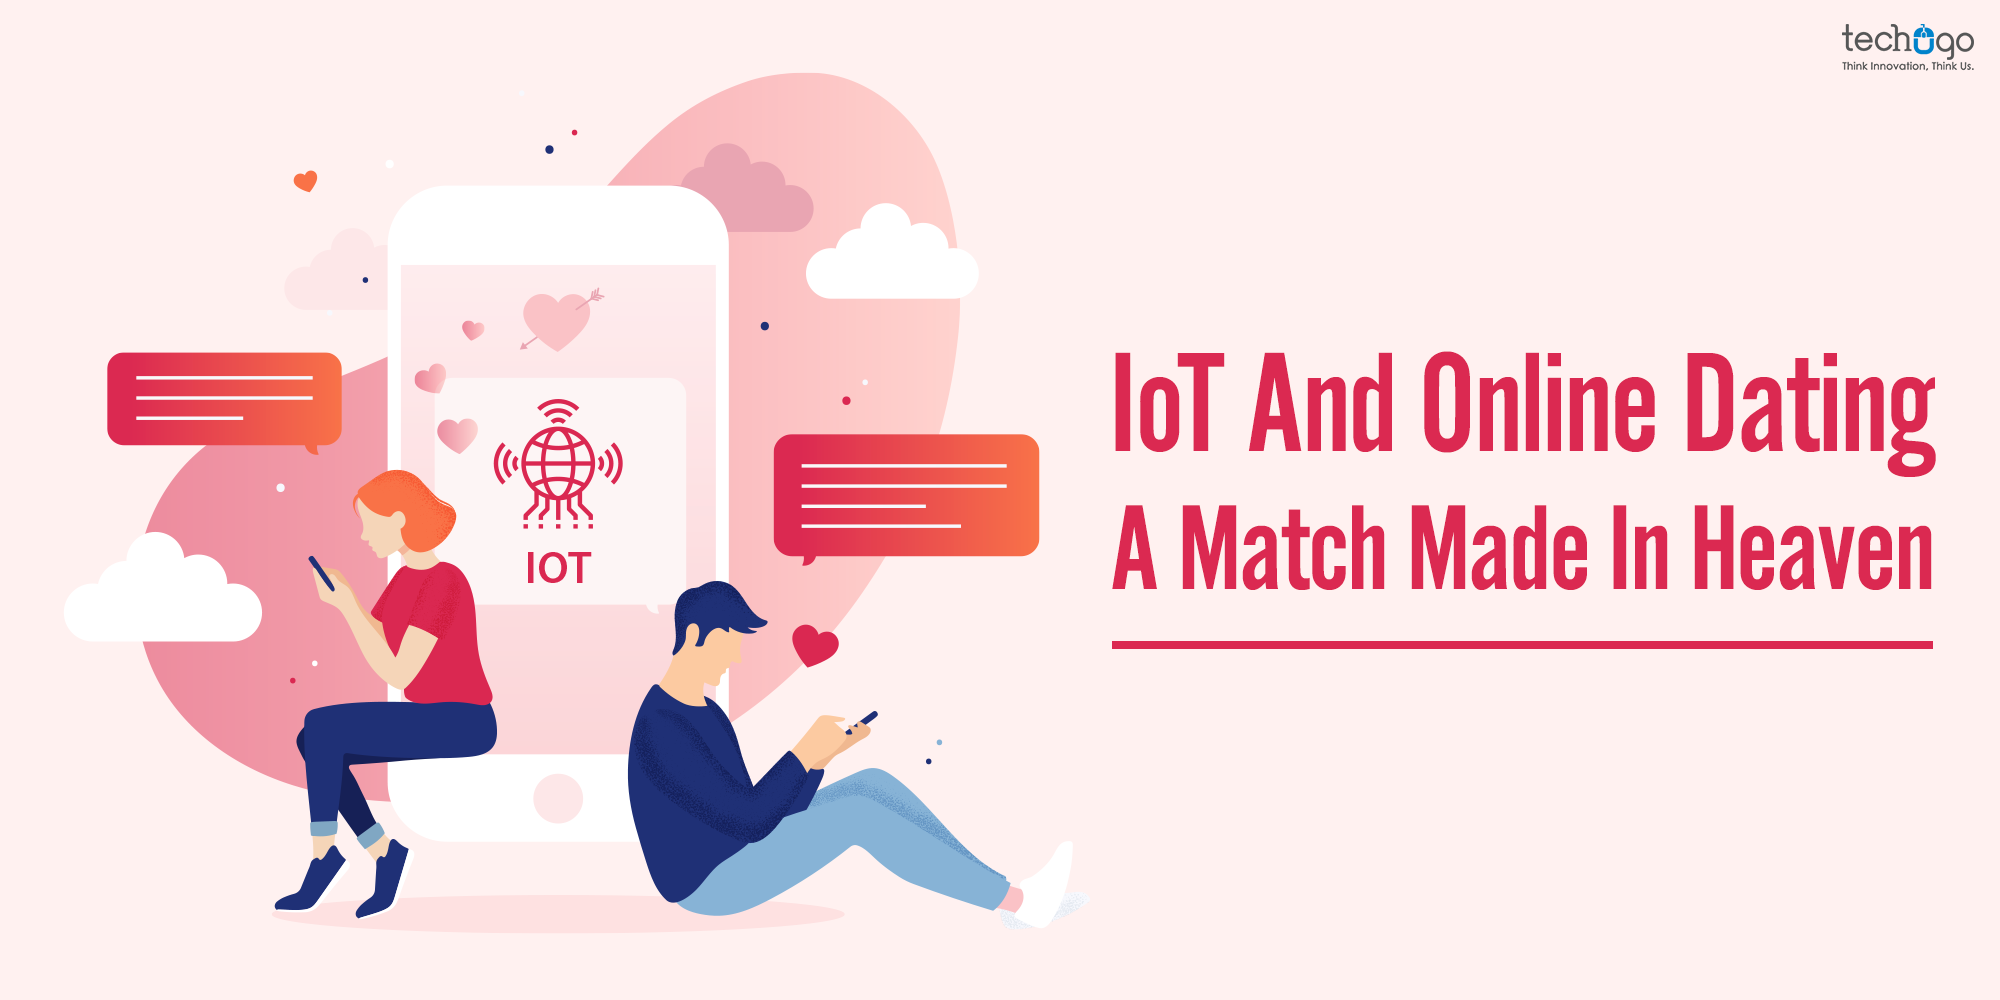 IoT And Online Dating; A Match Made in Heaven